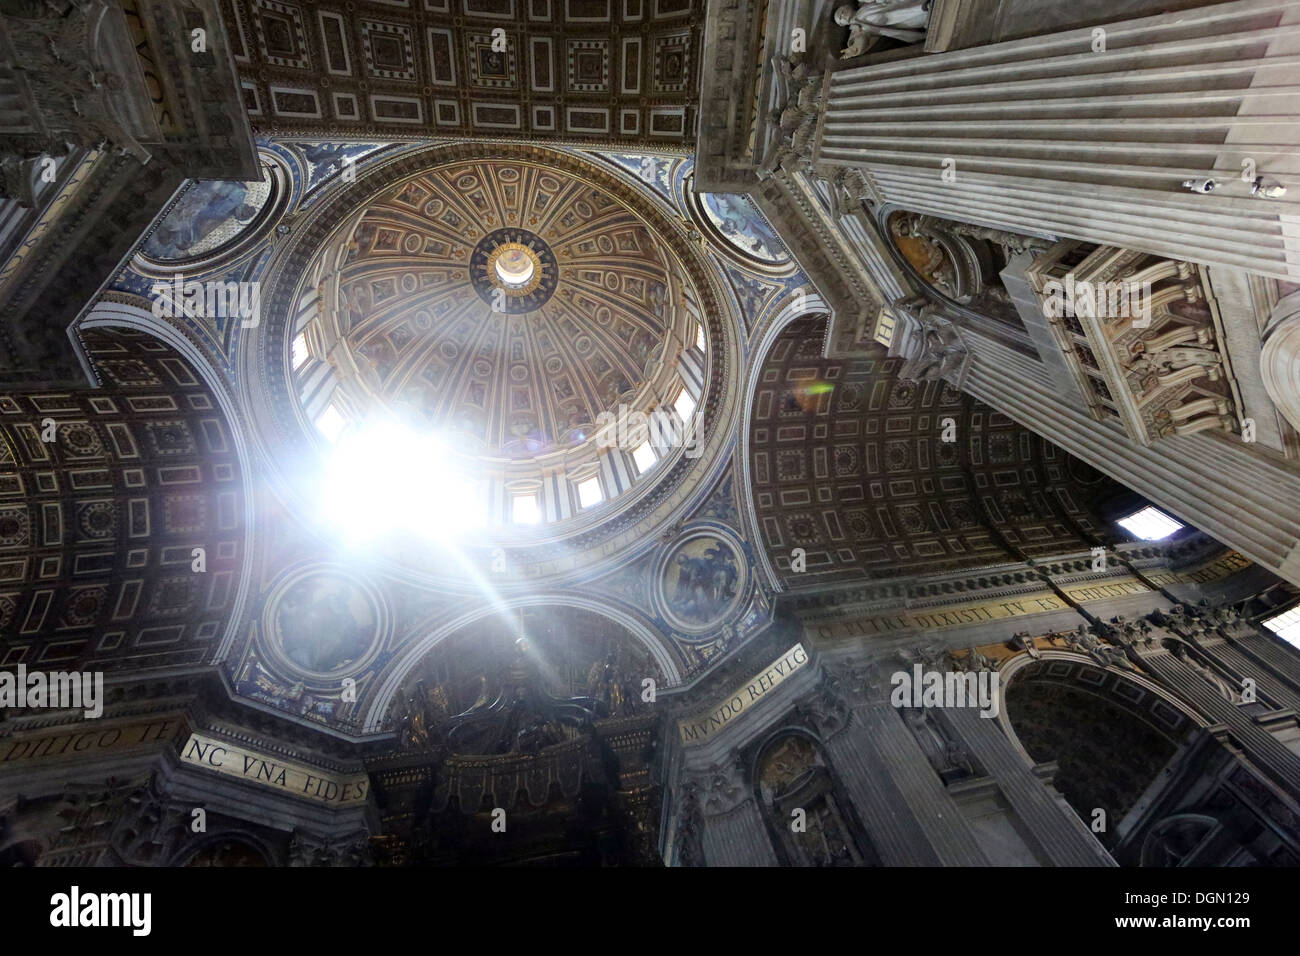 Vatican City, Vatican City, light in the dome of St. Peter's Basilica Stock Photo